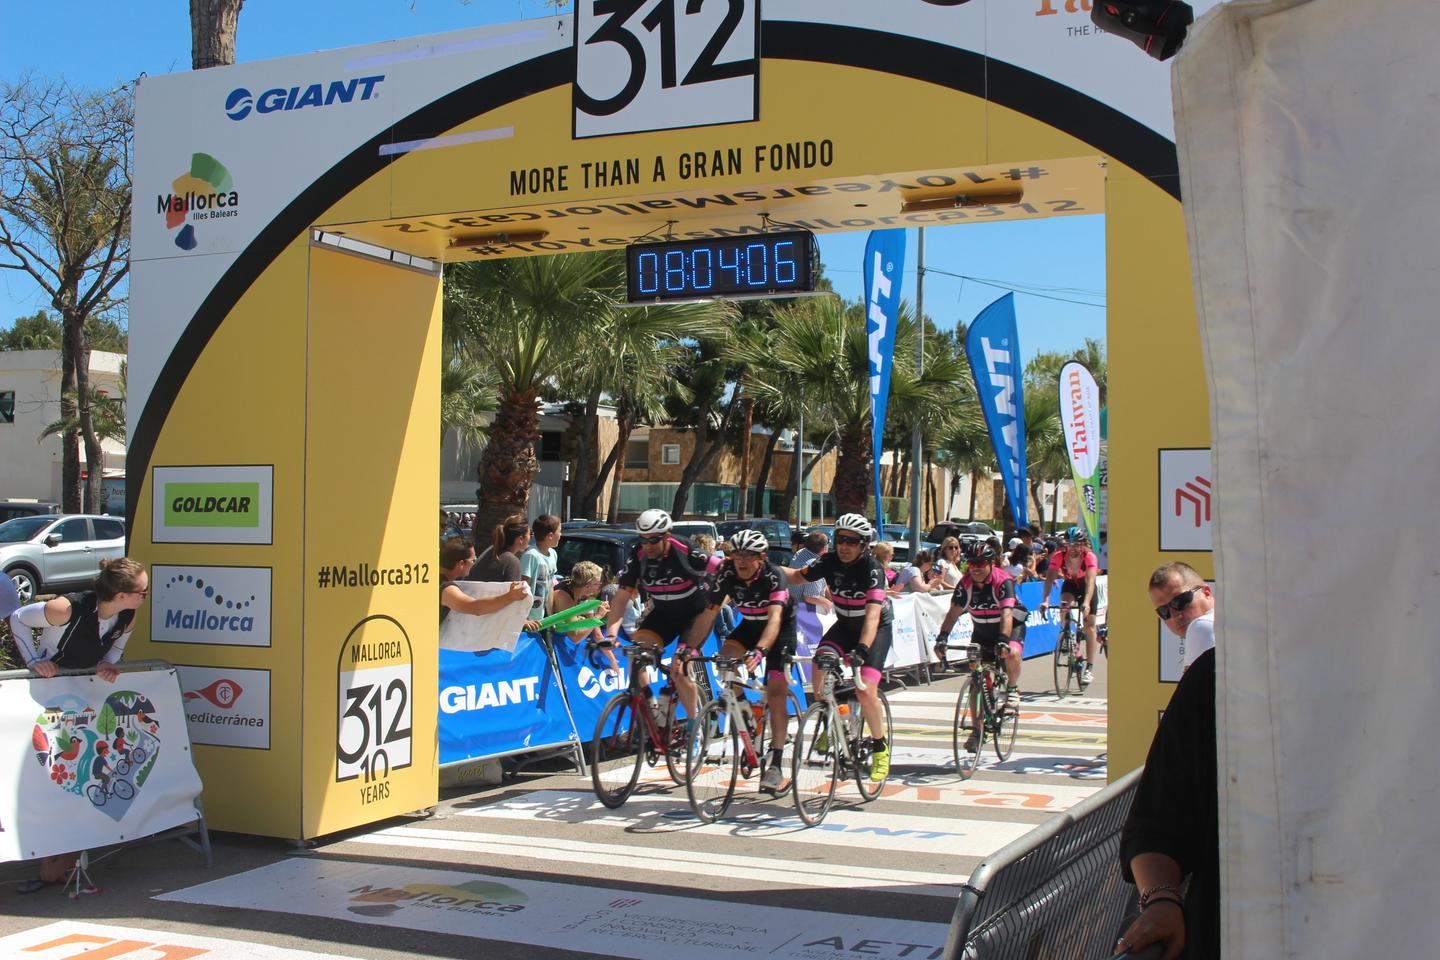 Cyclists crossing the finish line of the Mallorca 312 event.